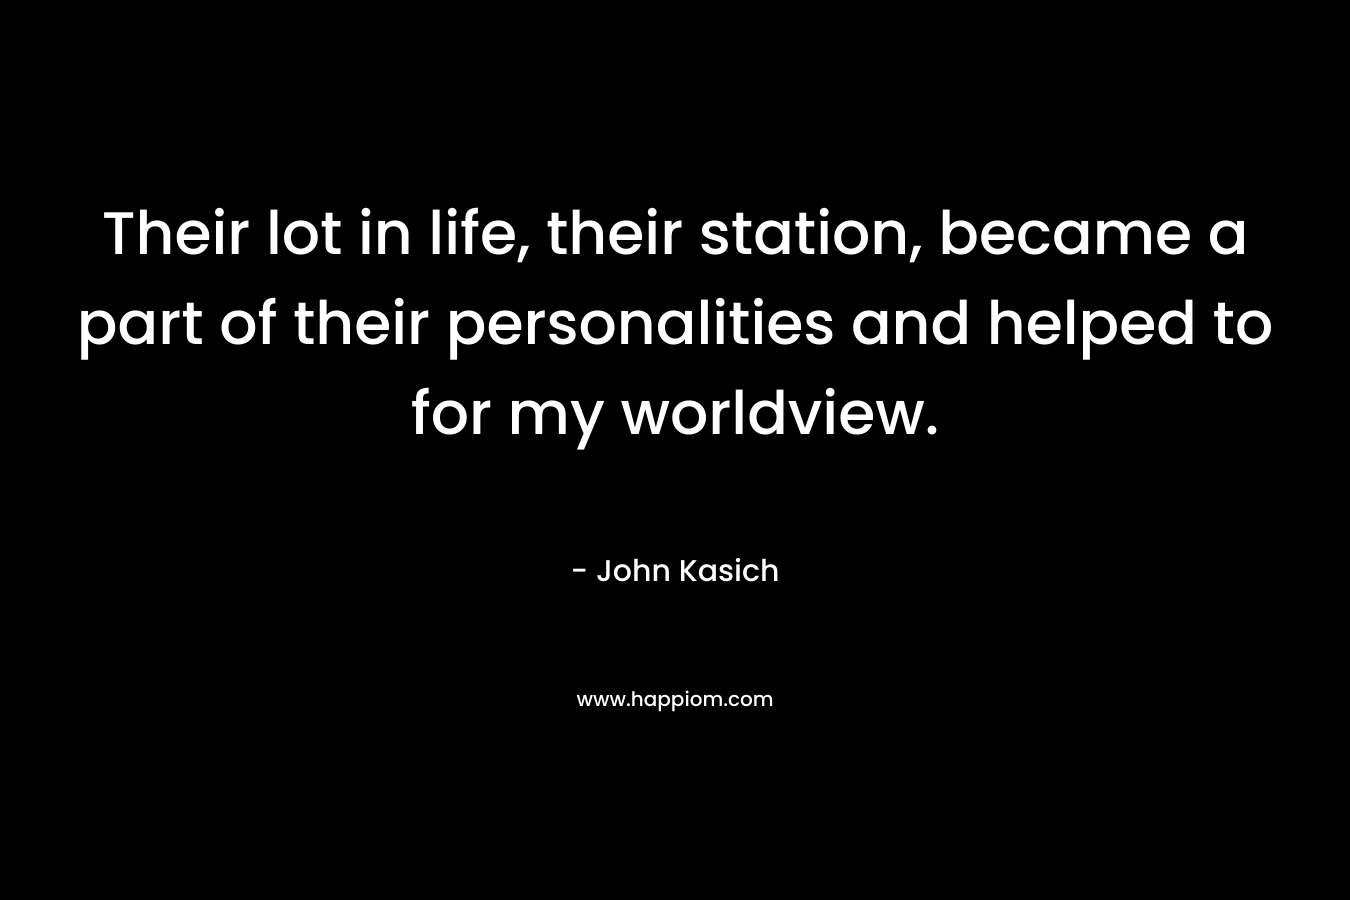 Their lot in life, their station, became a part of their personalities and helped to for my worldview. – John Kasich